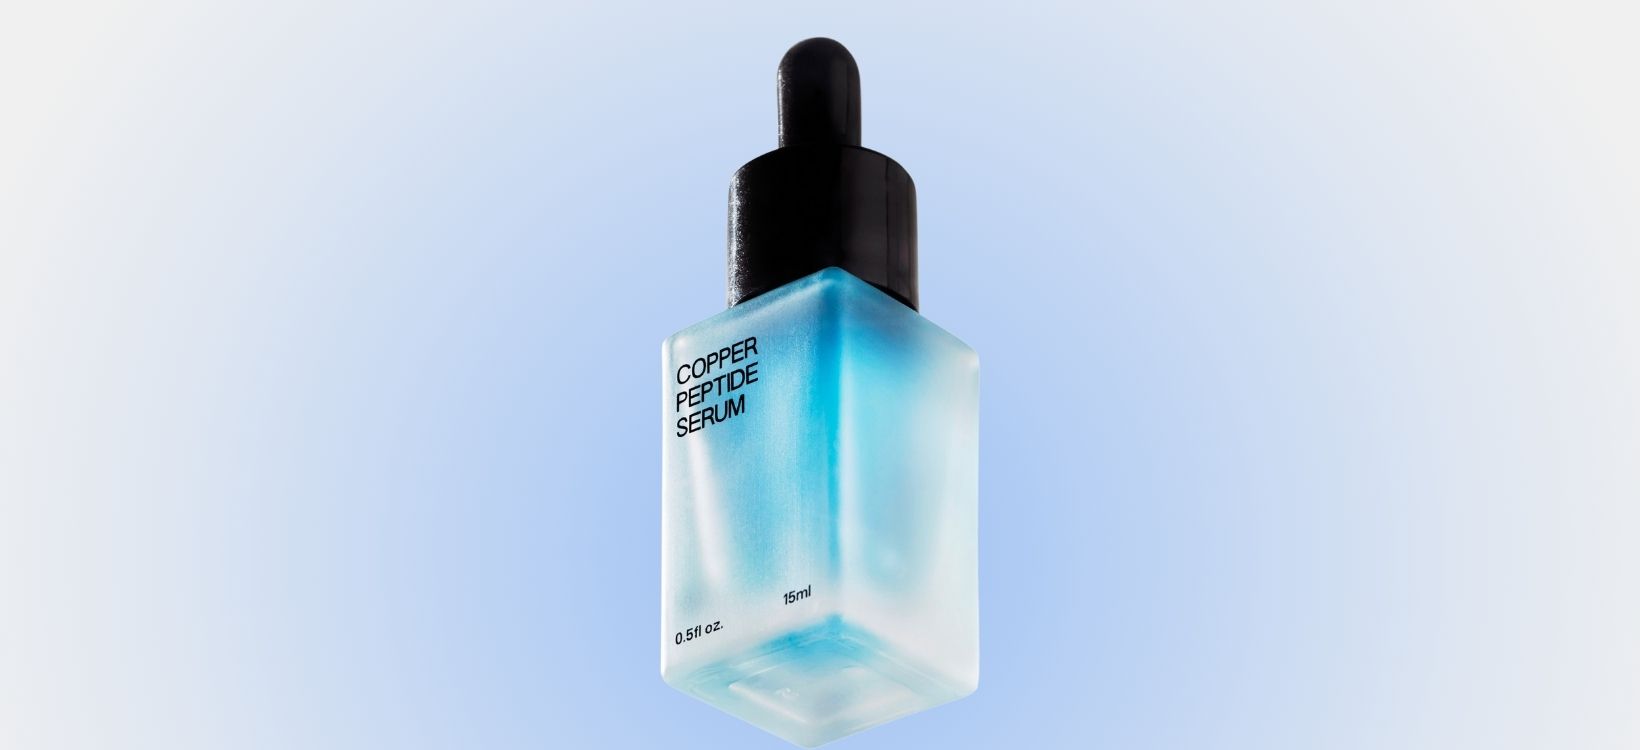 The Revolutionary Power of Copper Peptides: An In-depth Look into LED Esthetics' Biocell Copper Peptide Serum